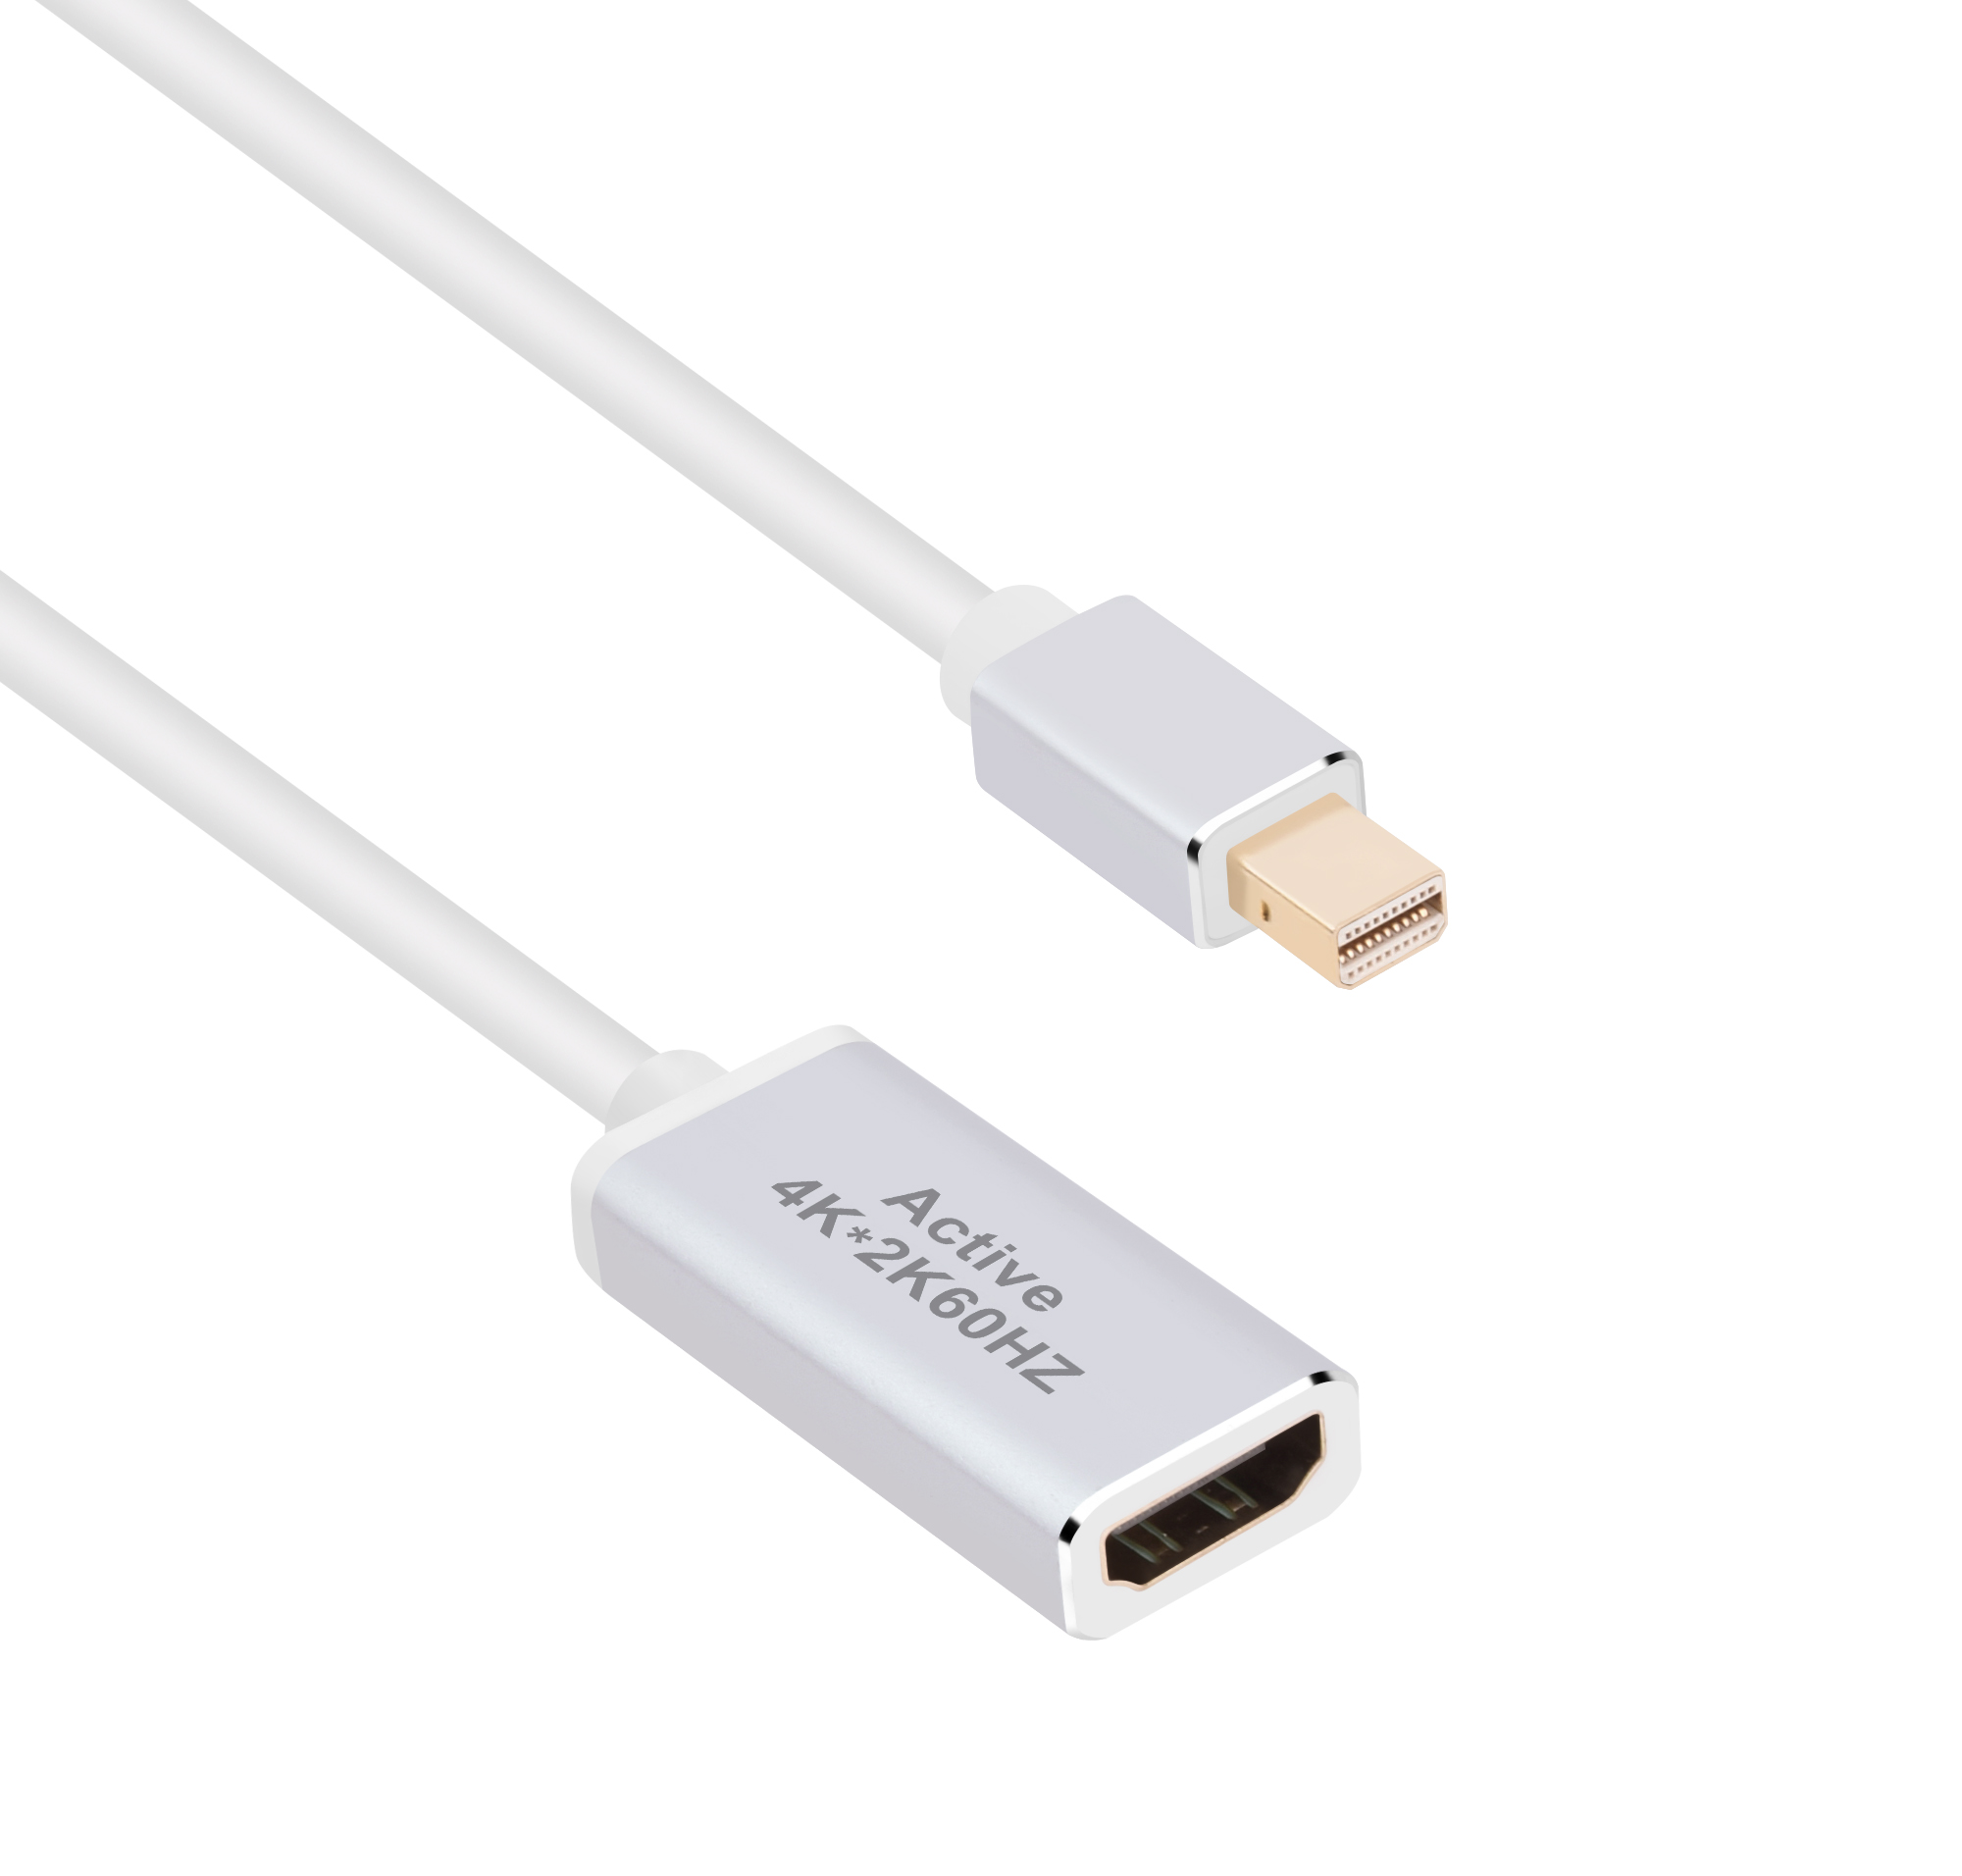 Active 4k60hz Mini DP to HDMI Adapter Cable